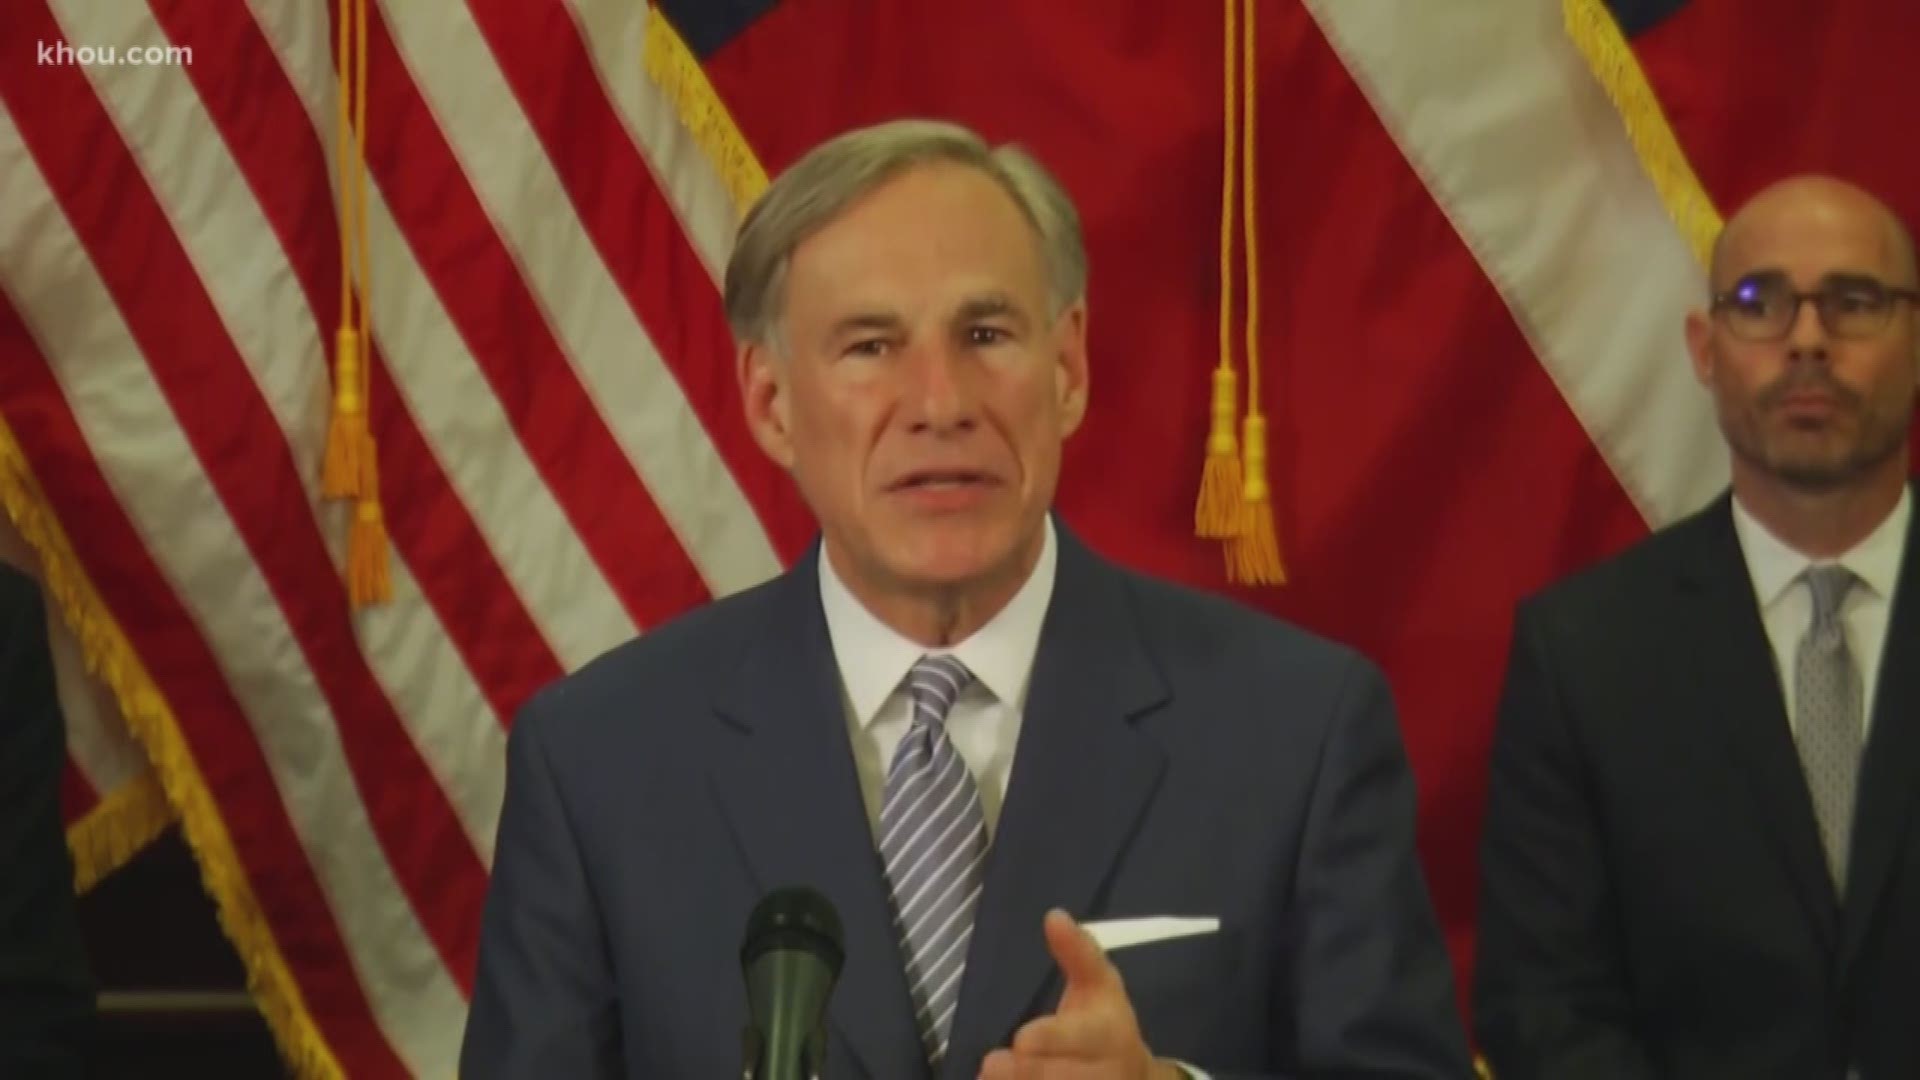 Gov. Greg Abbott unveiled a plan Friday to reopen the Texas economy during the coronavirus pandemic.